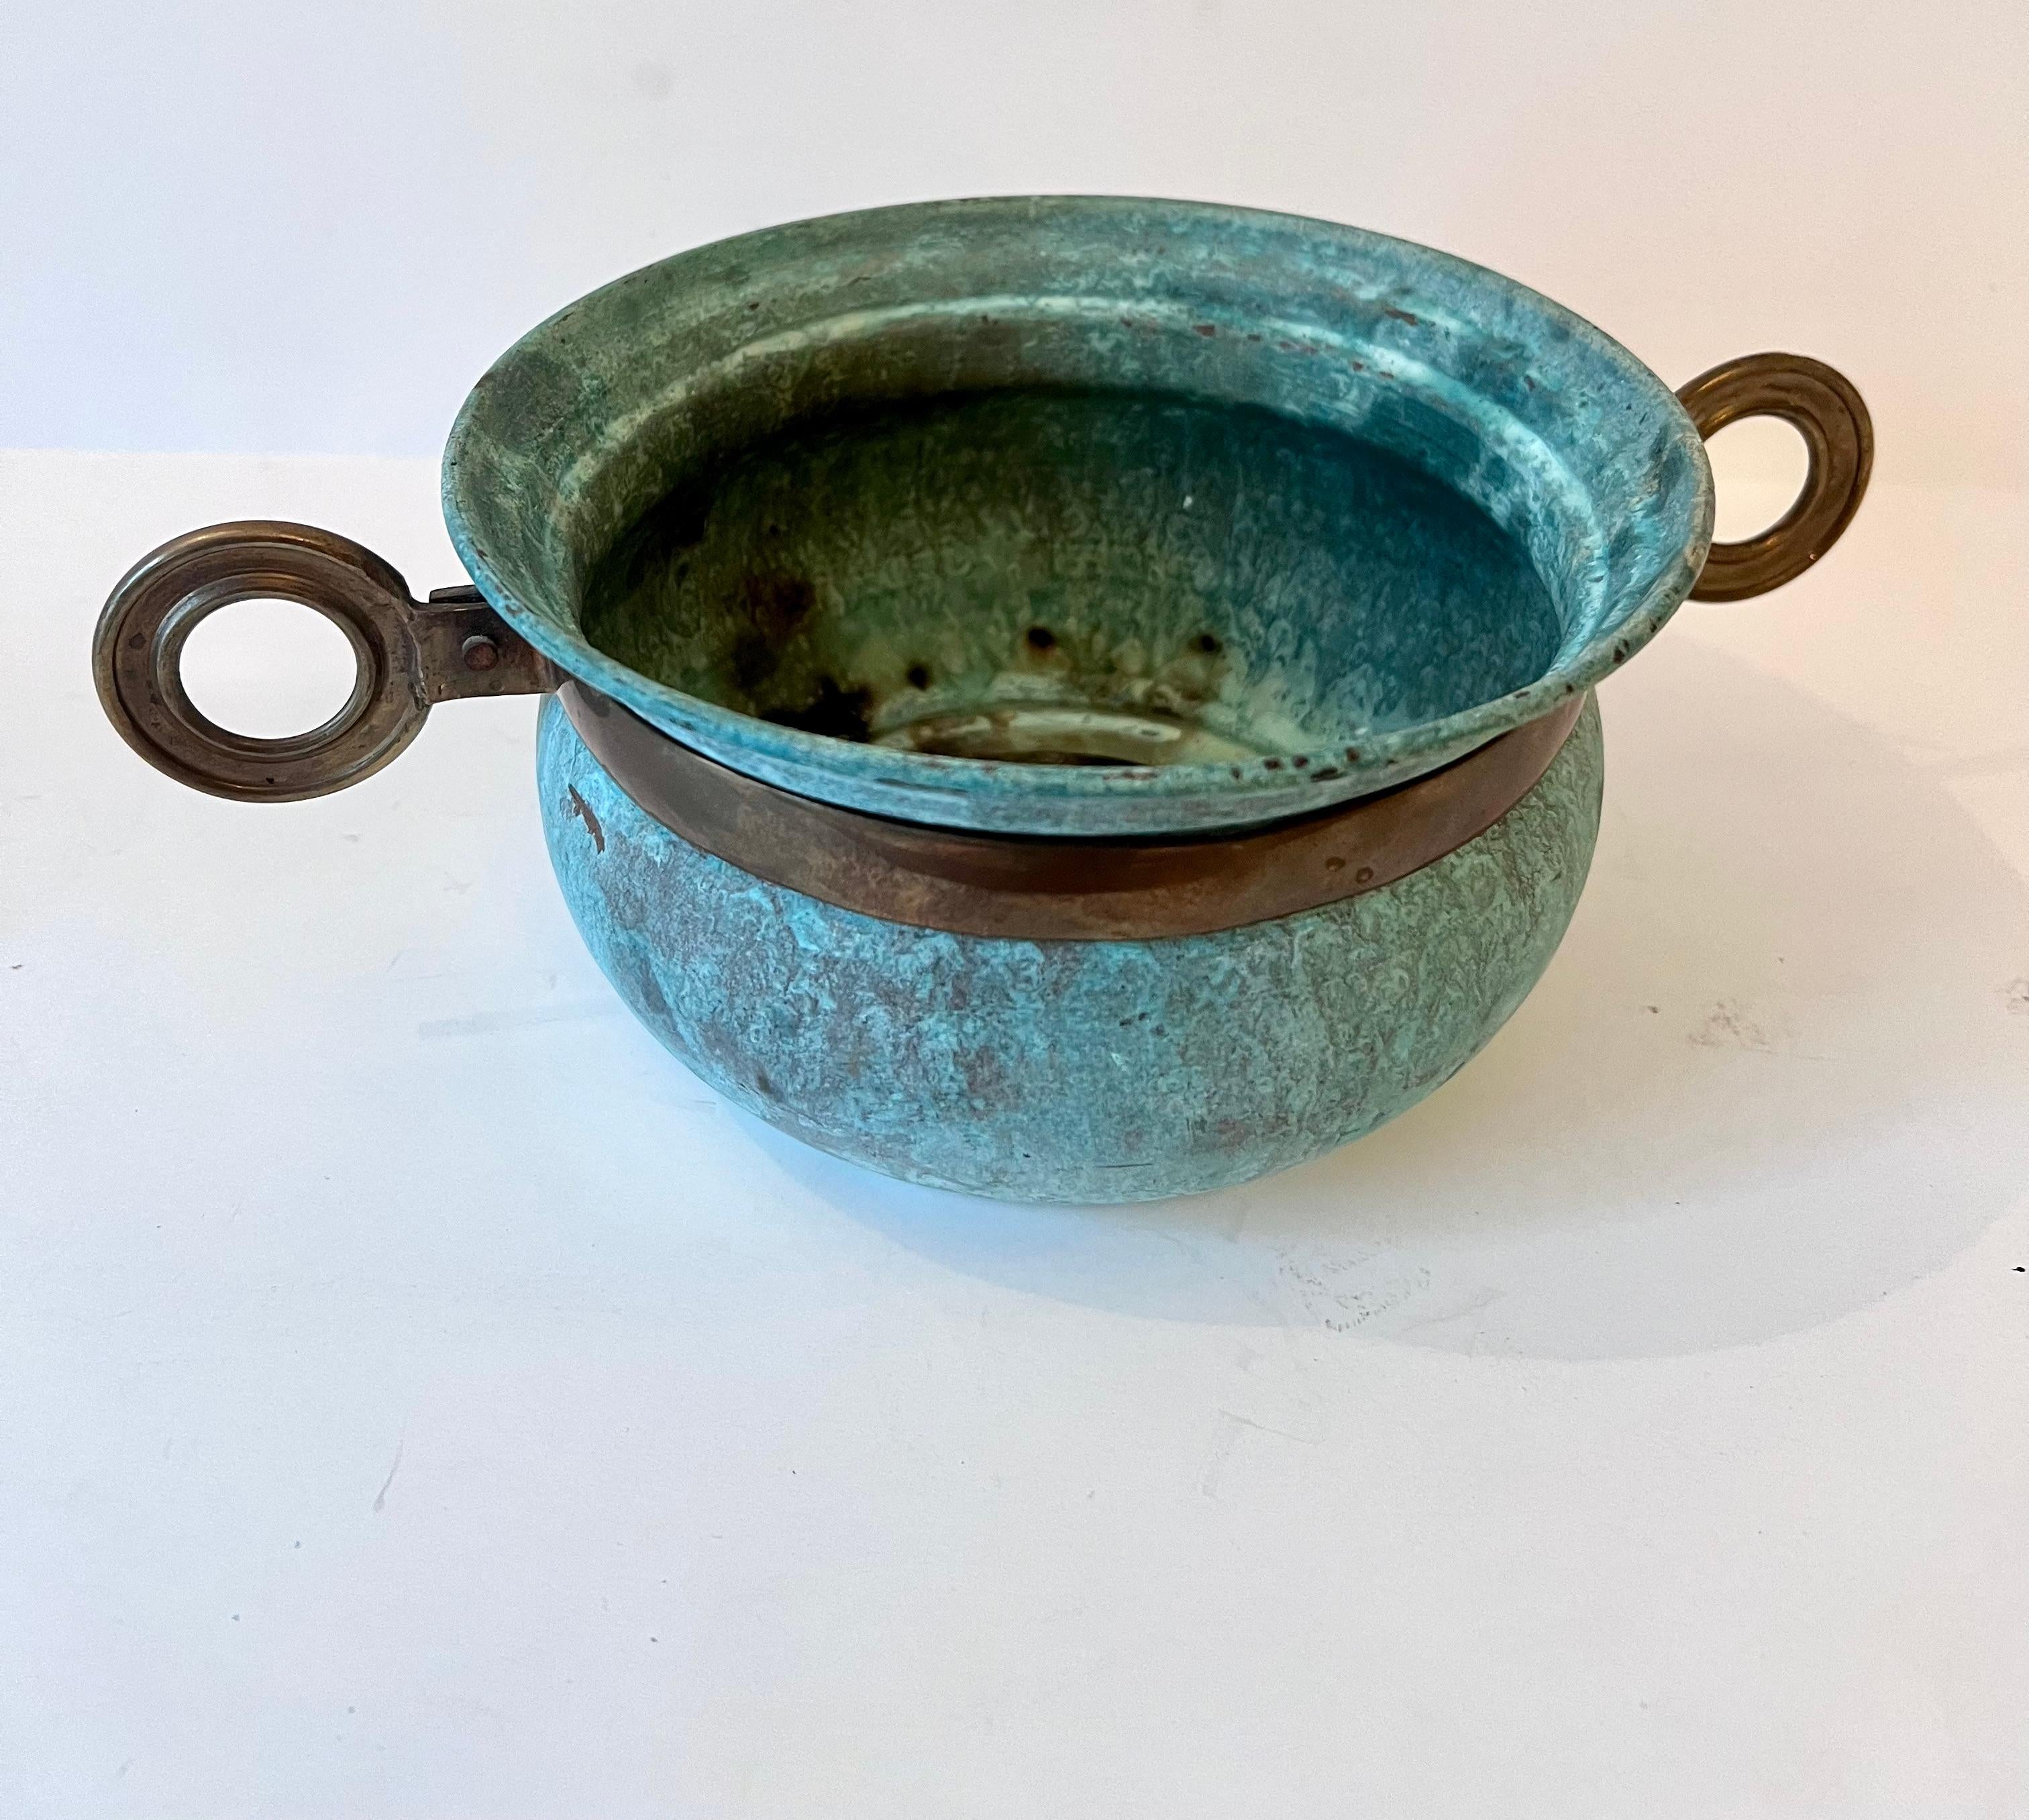 A heavily patinated verdigris bowl with unique brass details - rings on either side of the piece - compliment to many settings.

Could be used on a console, a cocktail or side table and even to hold pieces on the kitchen counter.